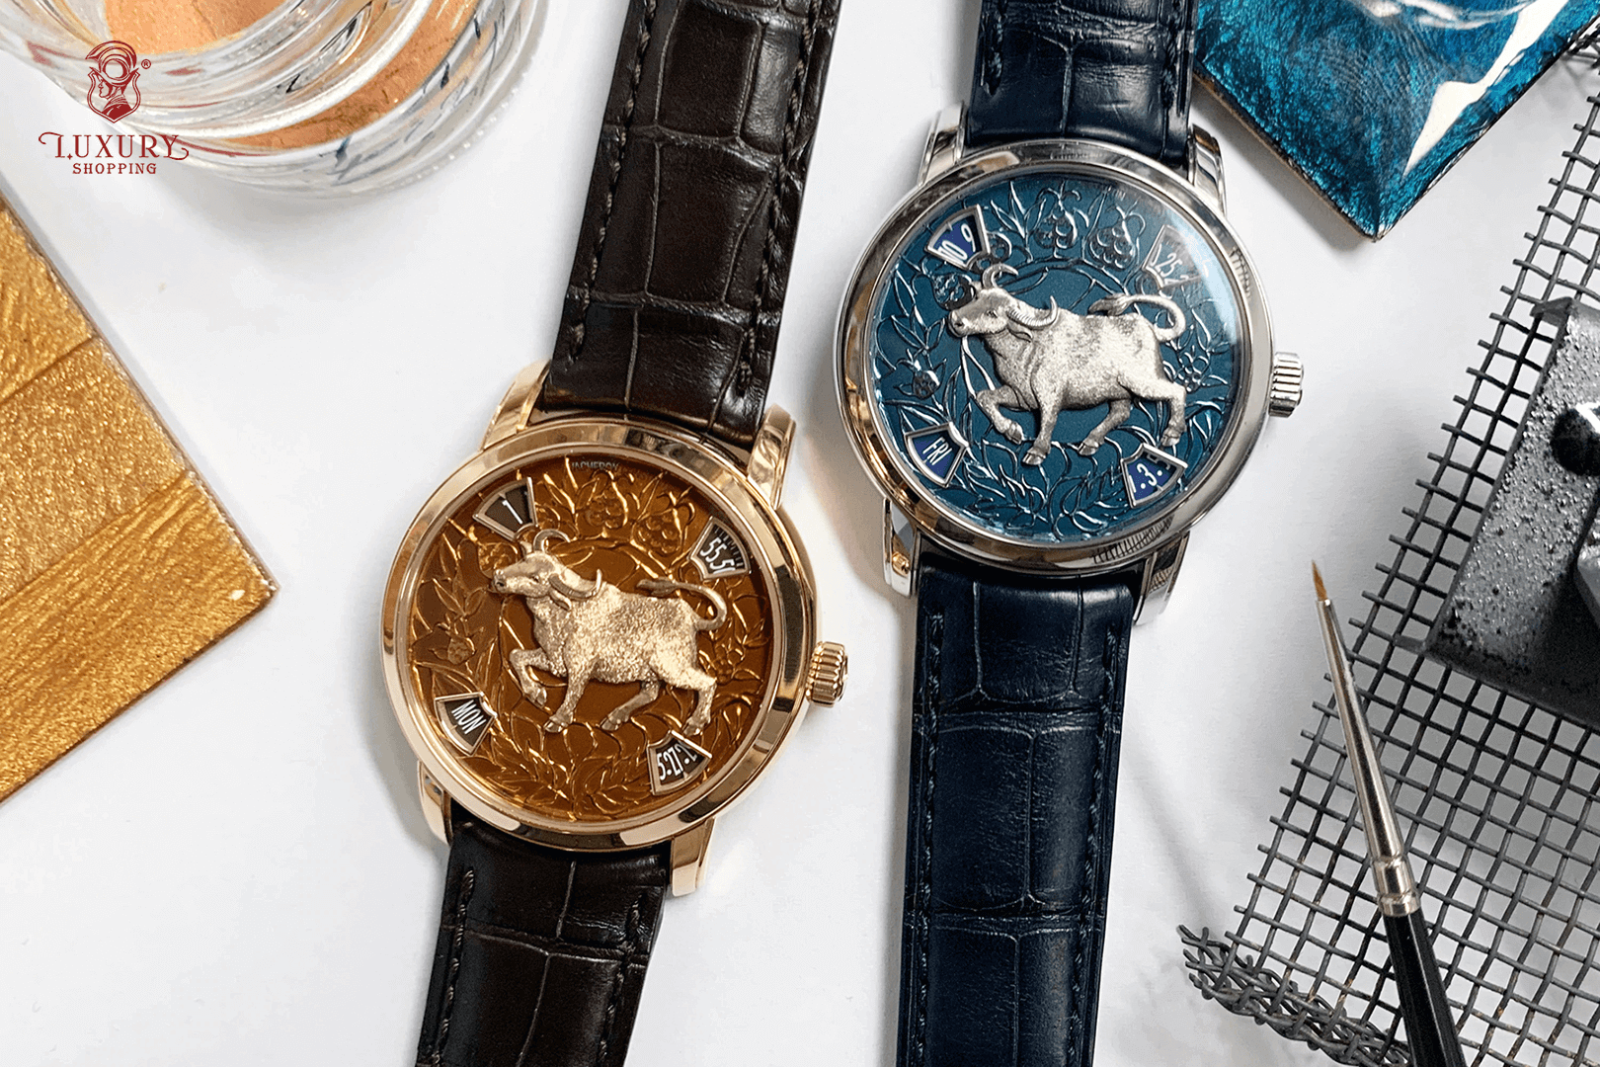 Vacheron Constantin Métiers d’Art The legend of the Chinese zodiac – Year of the Ox